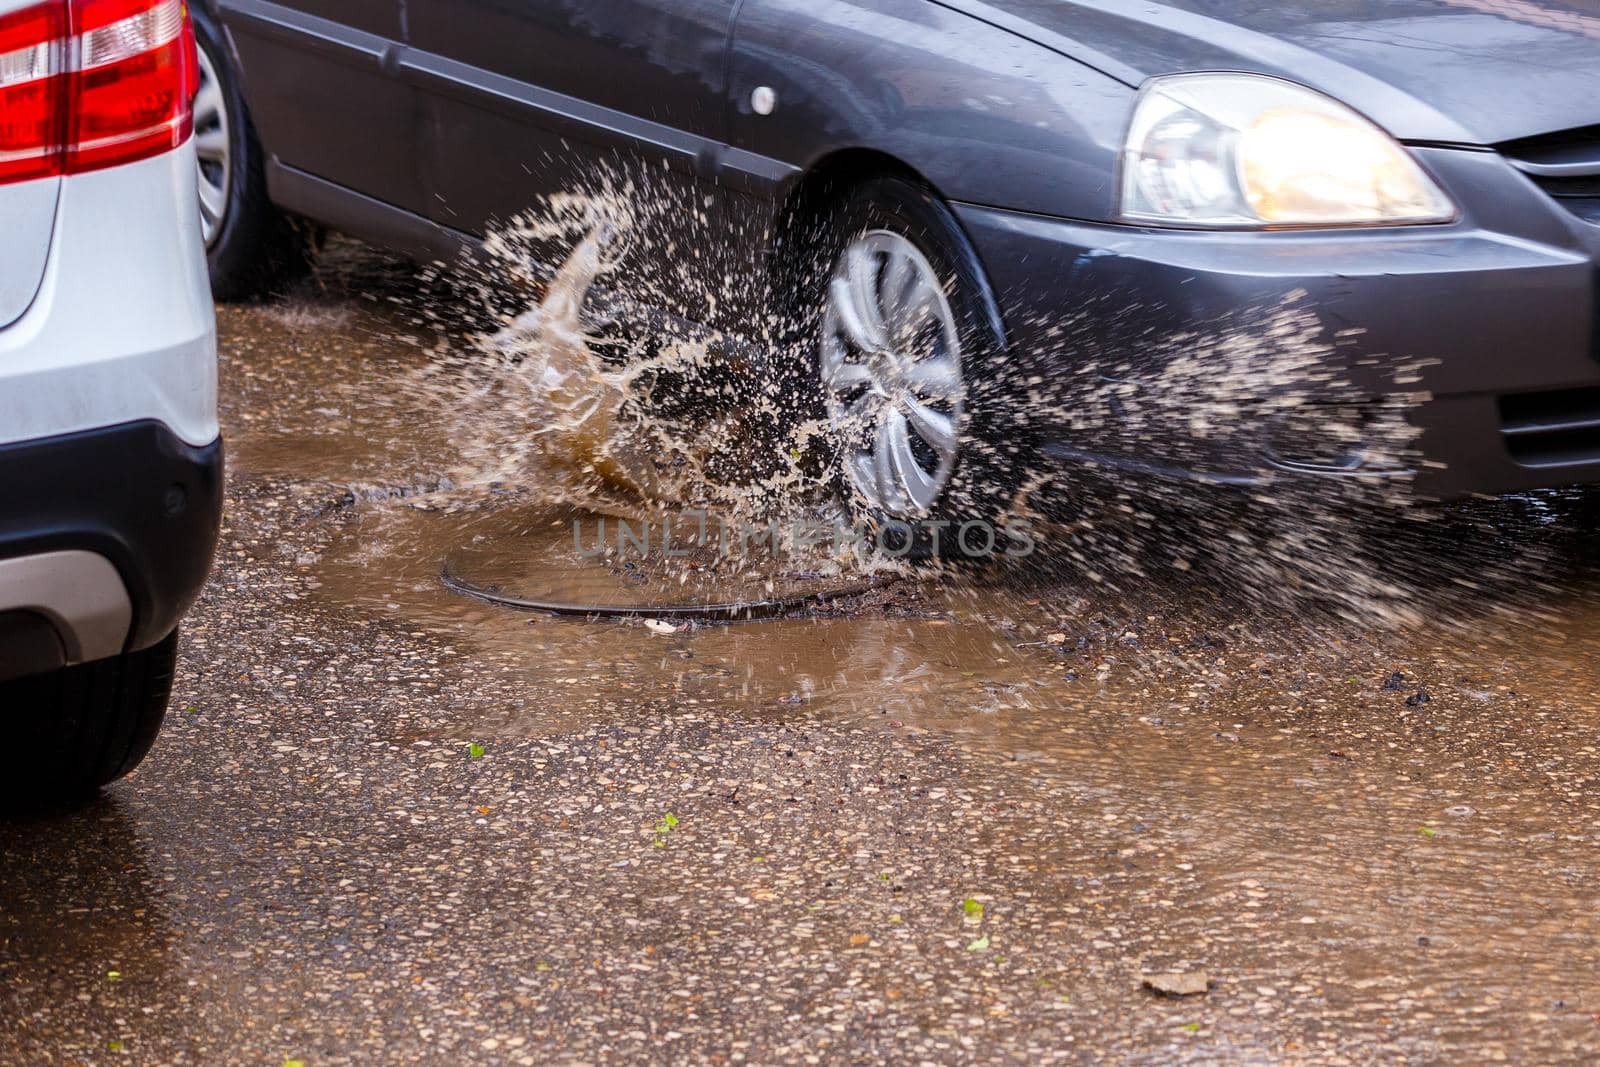 water splashes from car wheel passing summer puddle around manhole cover, close-up with selective focus